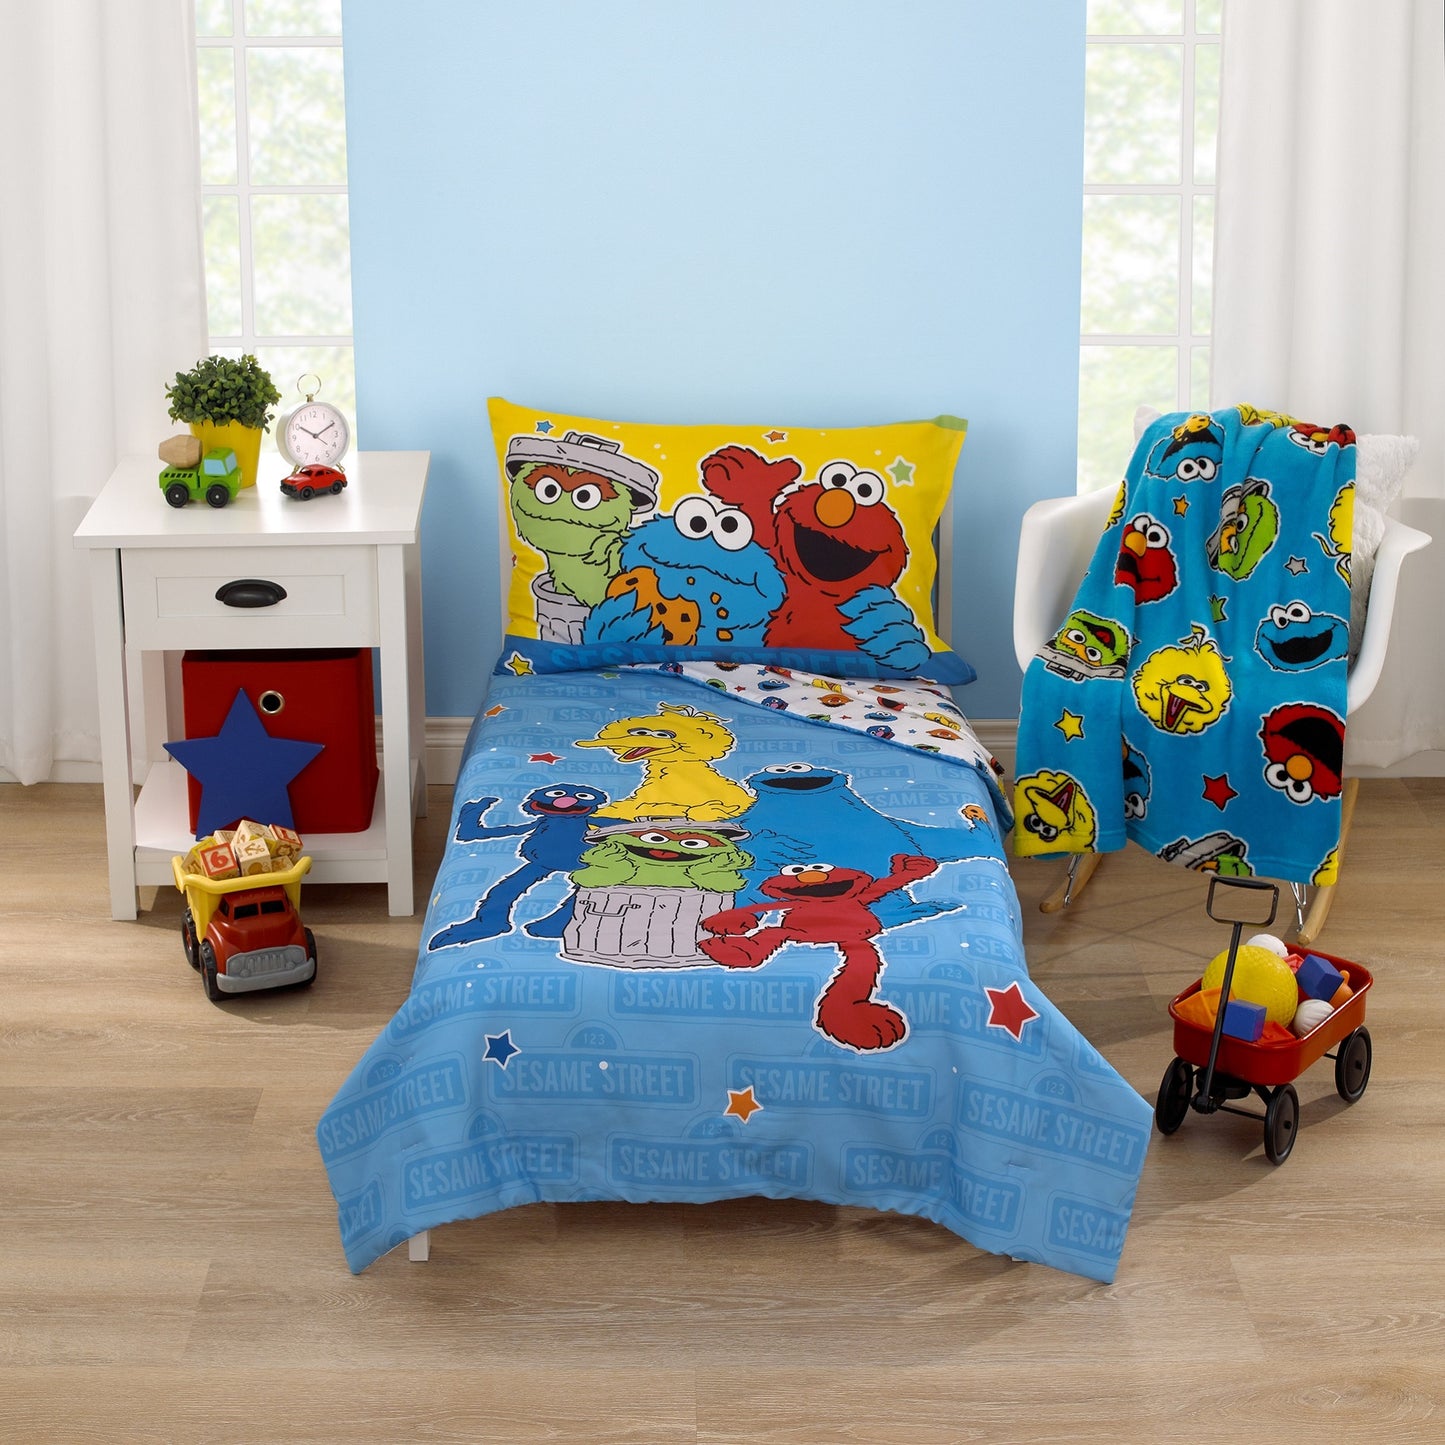 Sesame Street Come and Play Blue, Green, Red and Yellow, Elmo, Big Bird, Cookie Monster, Grover, Oscar the Grouch and Ernie - Decorative Toddler Pillow